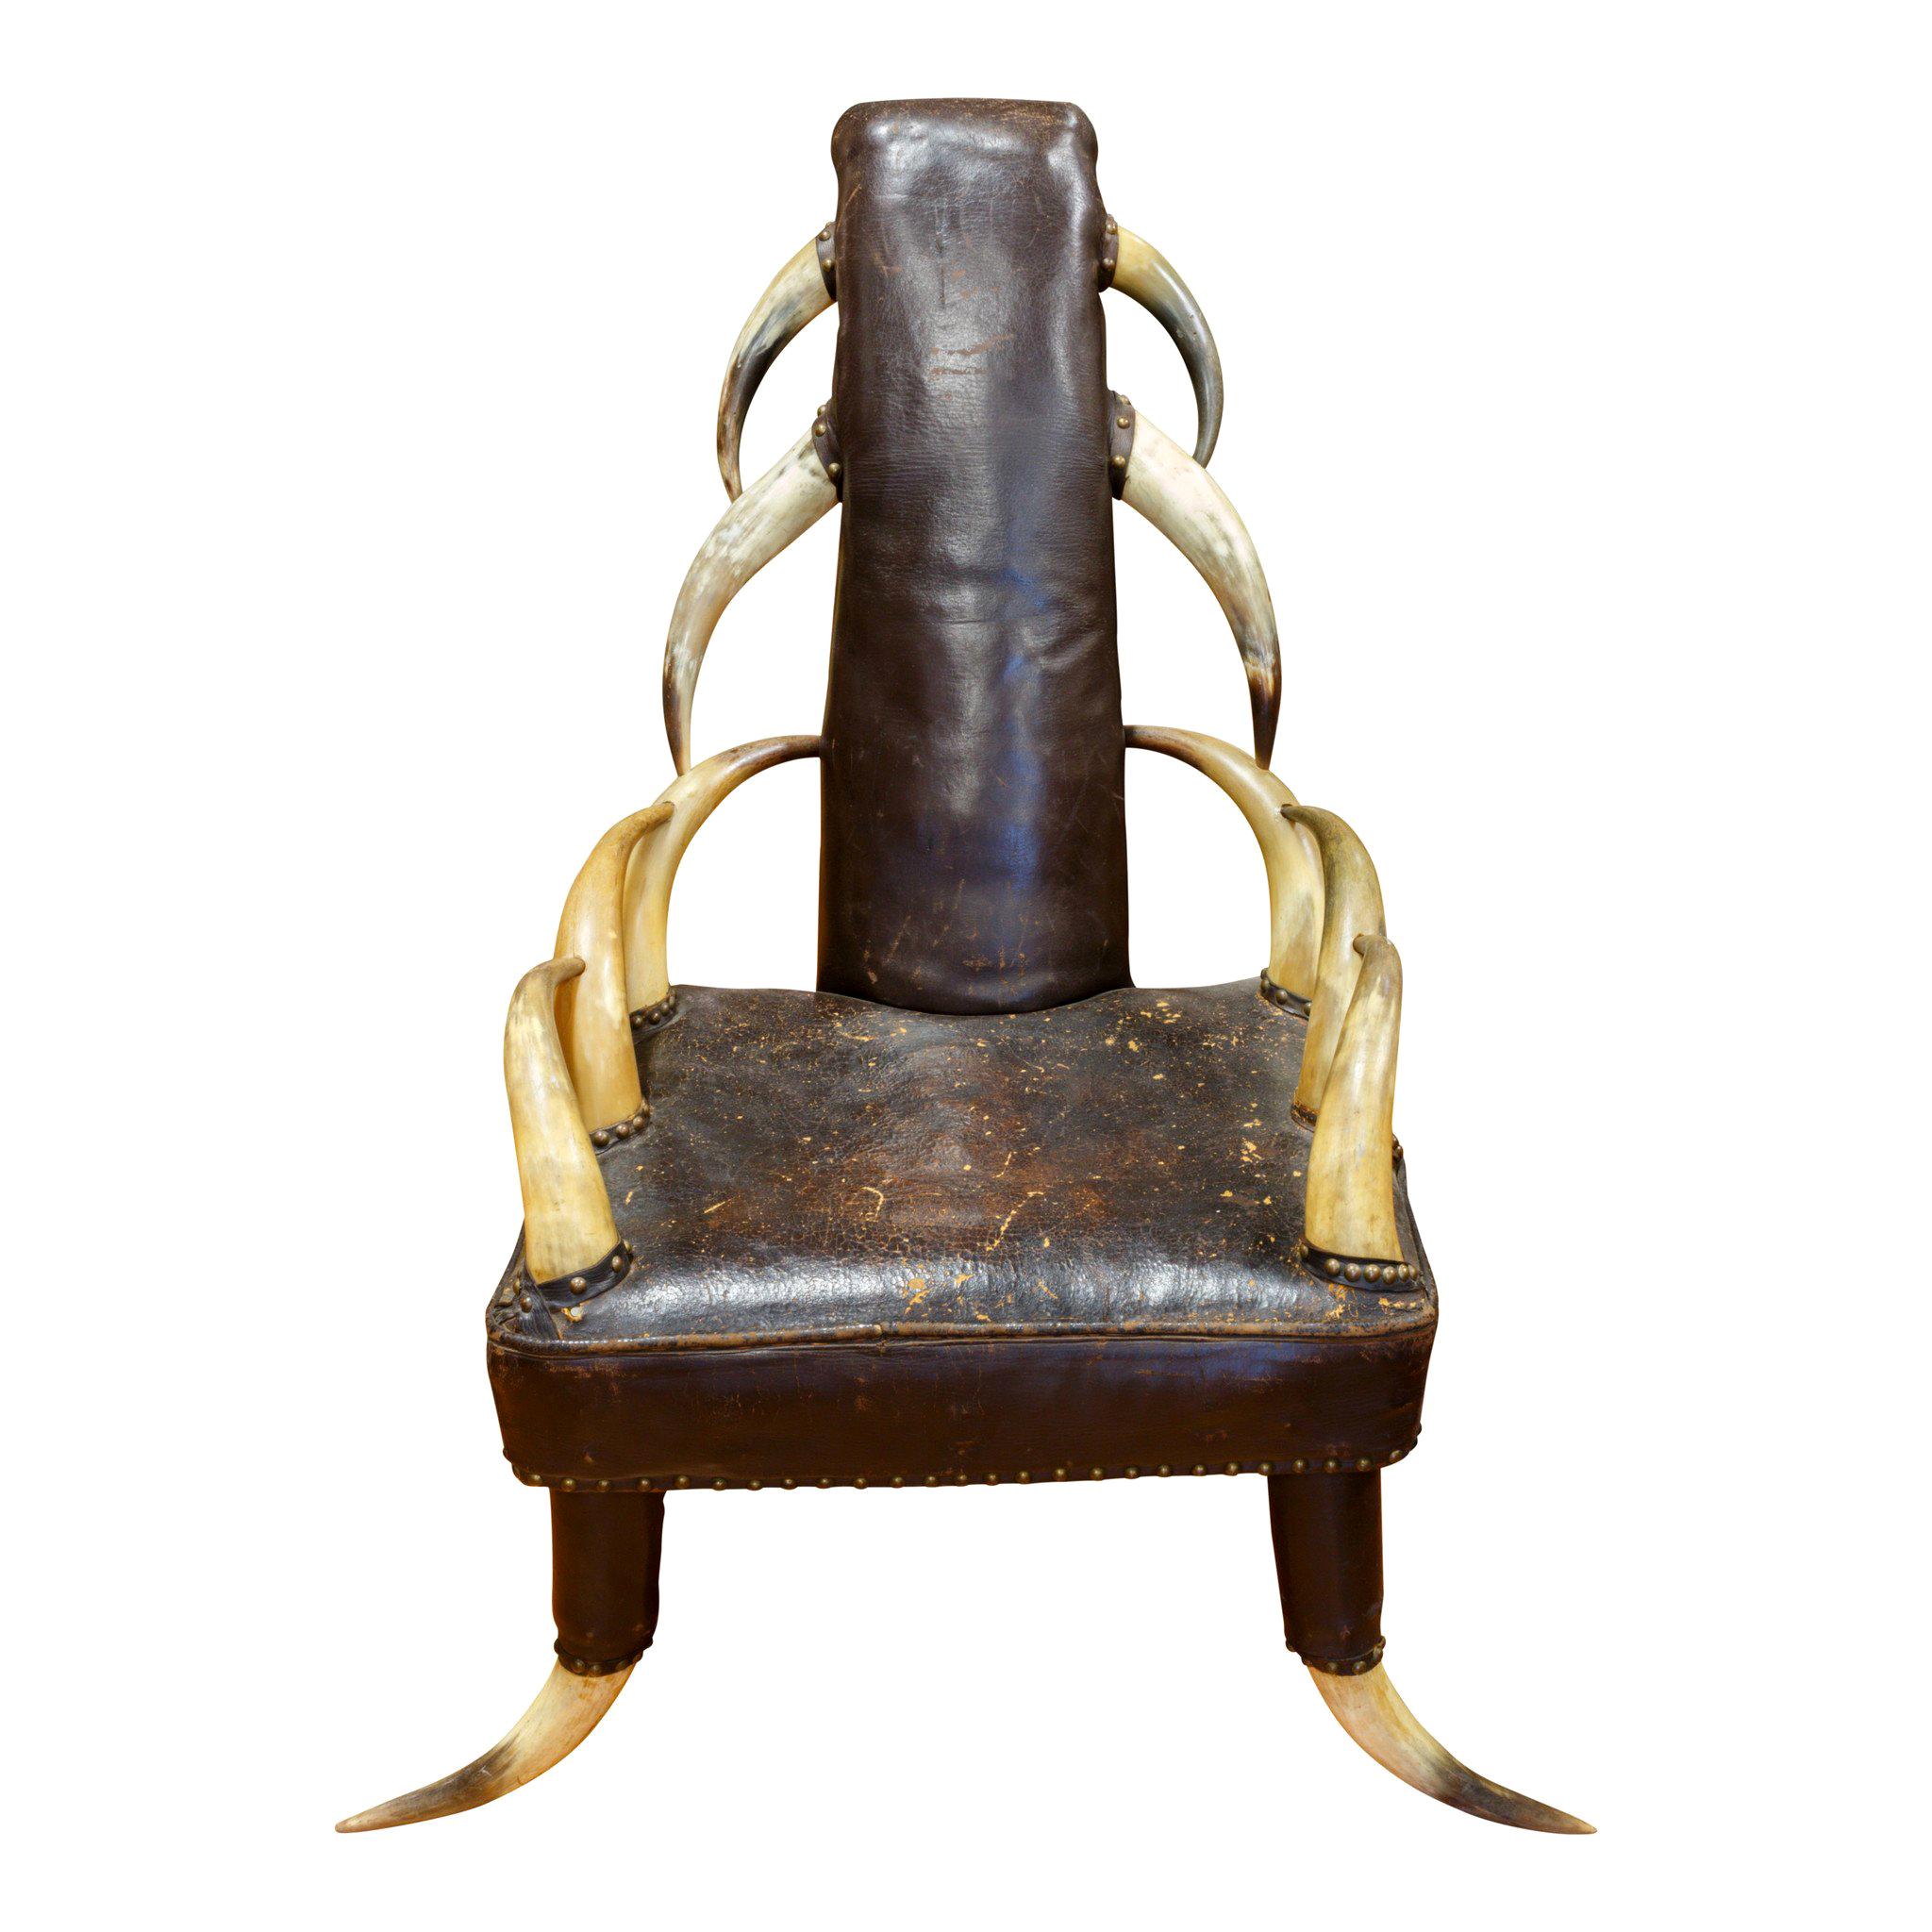 19th Century 14 Horn and Leather Chair